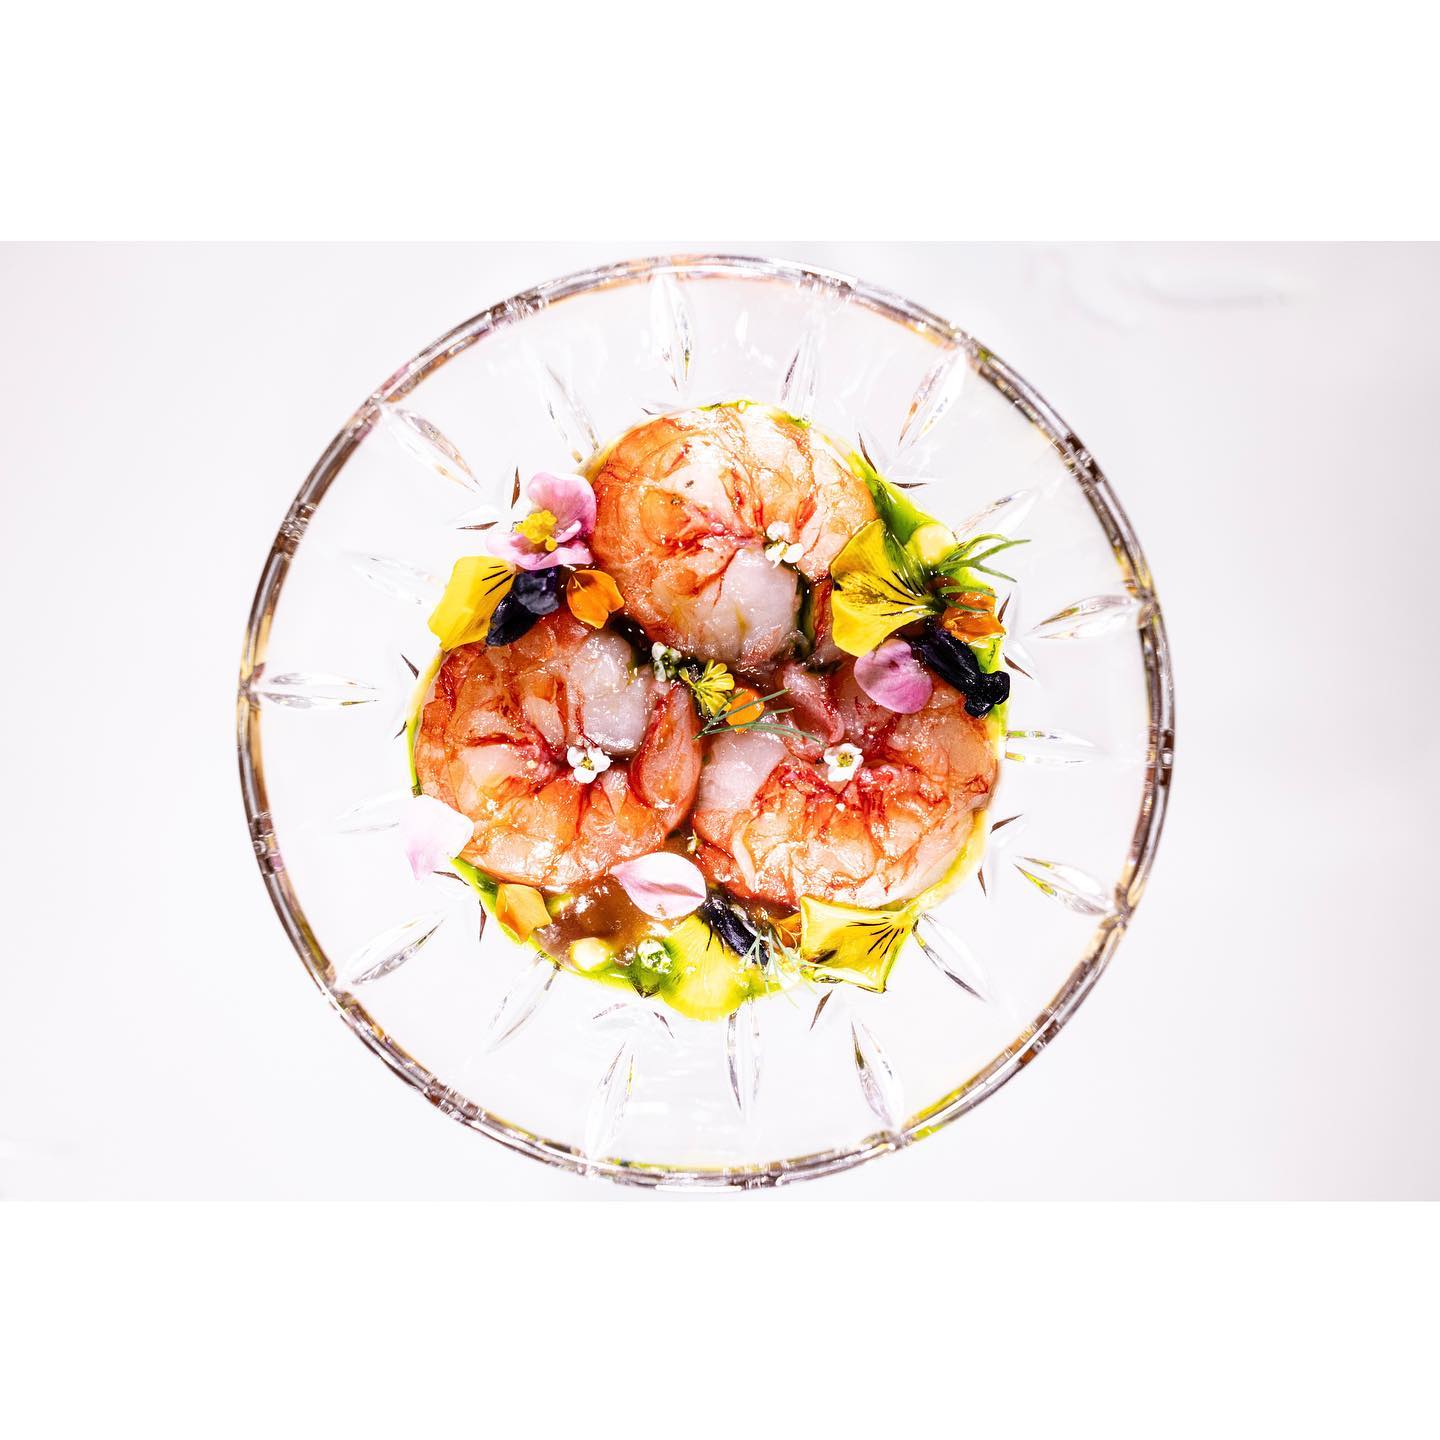 Plate of prawns on glass plate with white background at Maison Ruggieri restaurant 